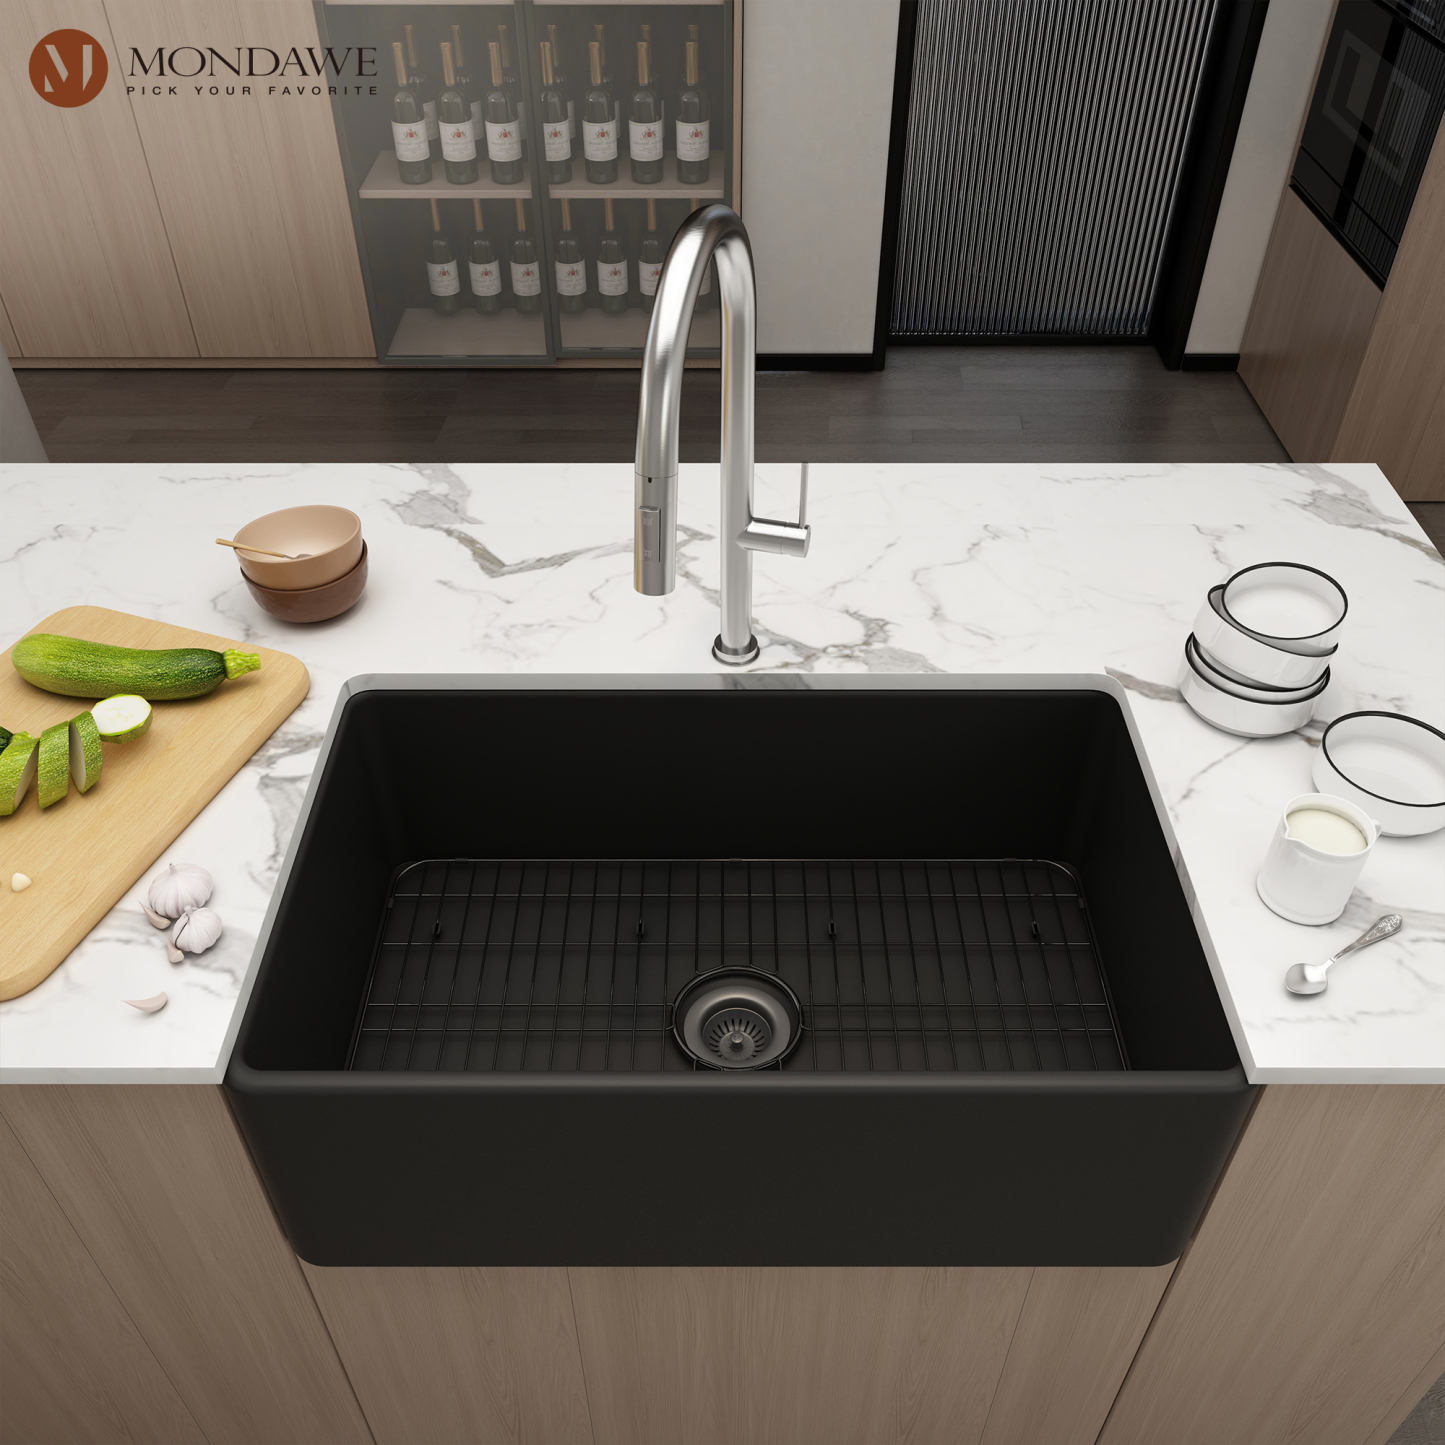 Undermount 32 in. matte black single bowl fireclay kitchen sink comes with pull-down faucet-Mondawe